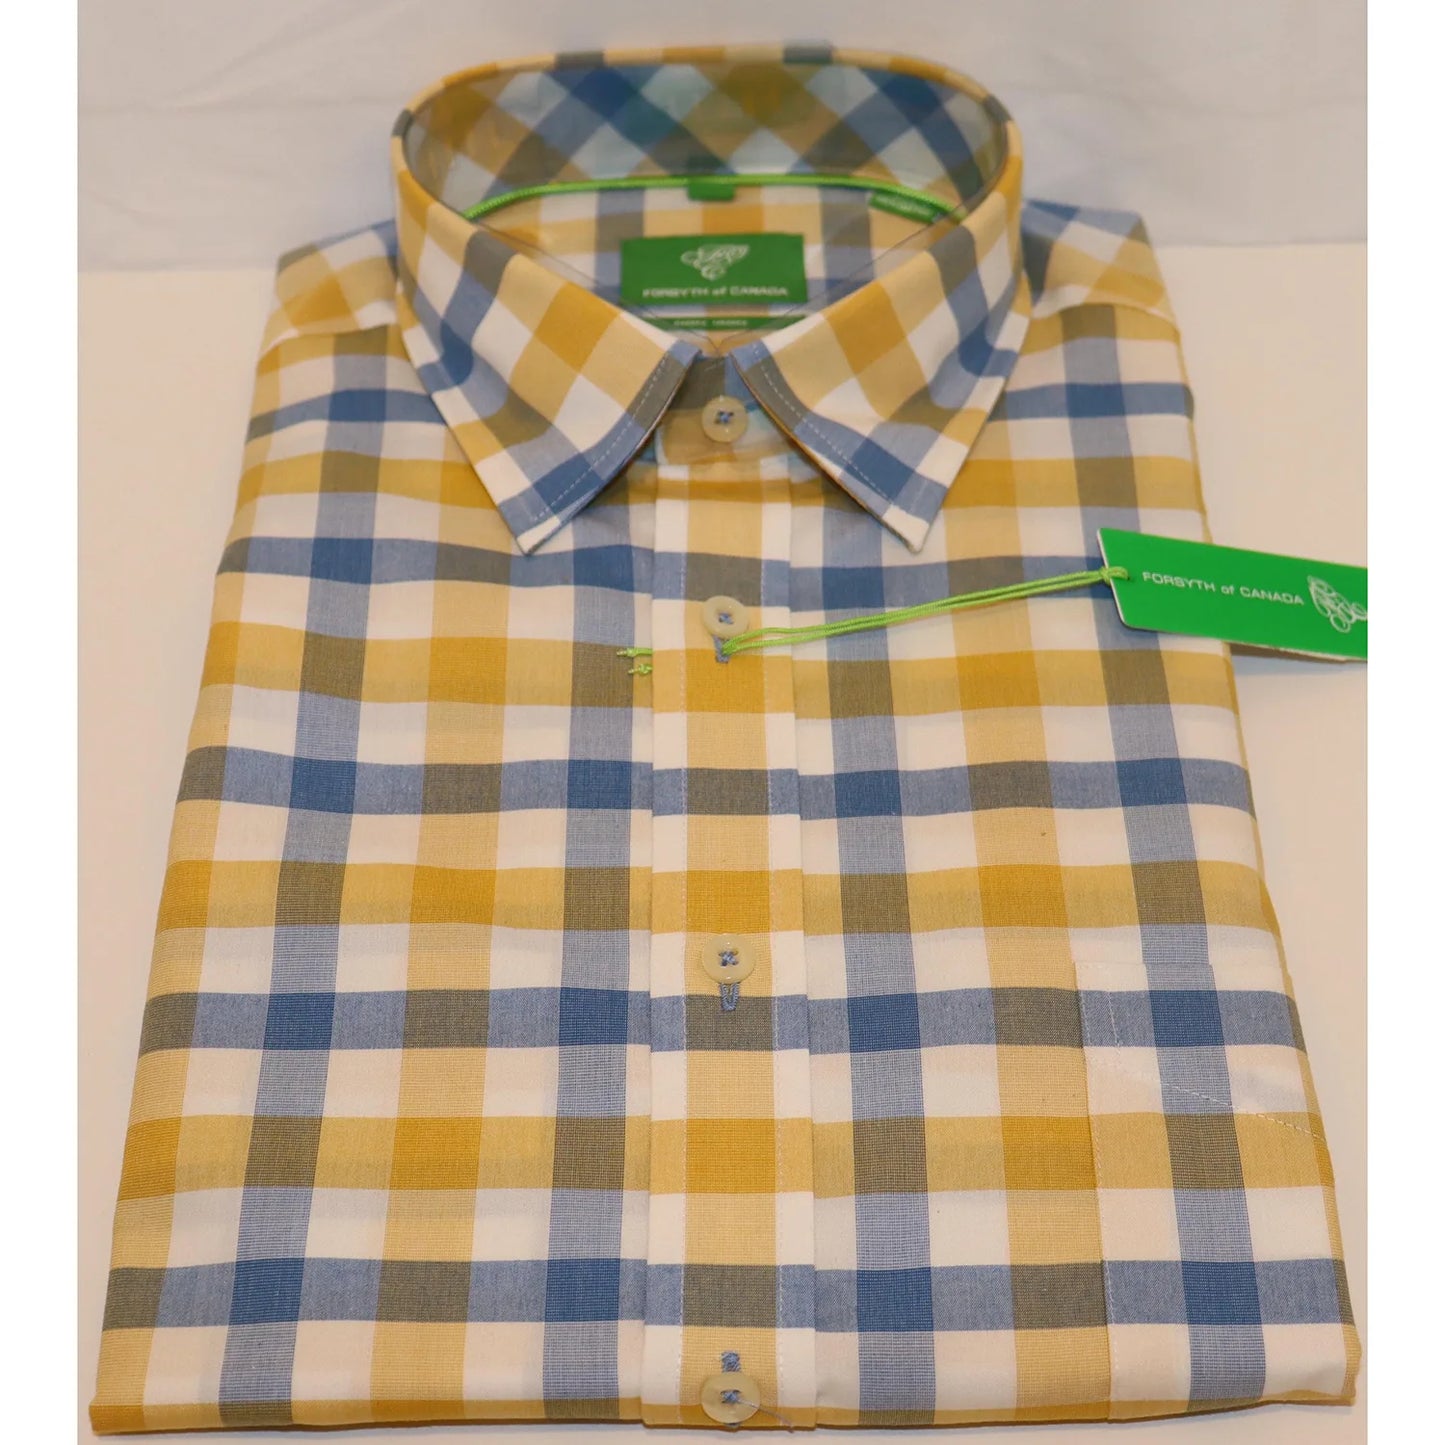 Forsyth of Canada Button Down - Yellow/Blue Check